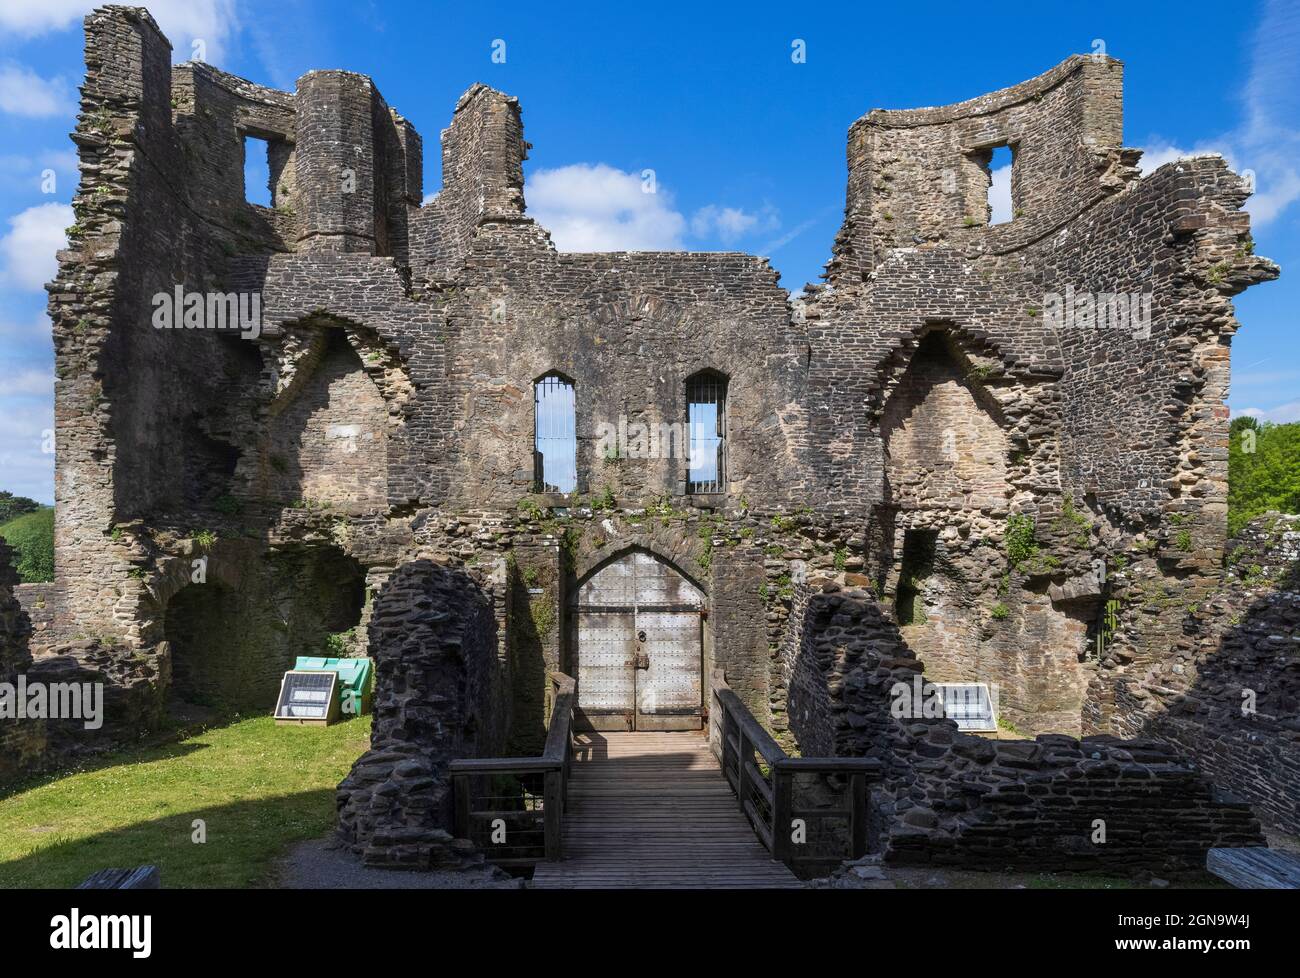 The Outer West Gatehouse of Caerphilly Castle, South Wales, UK Stock Photo